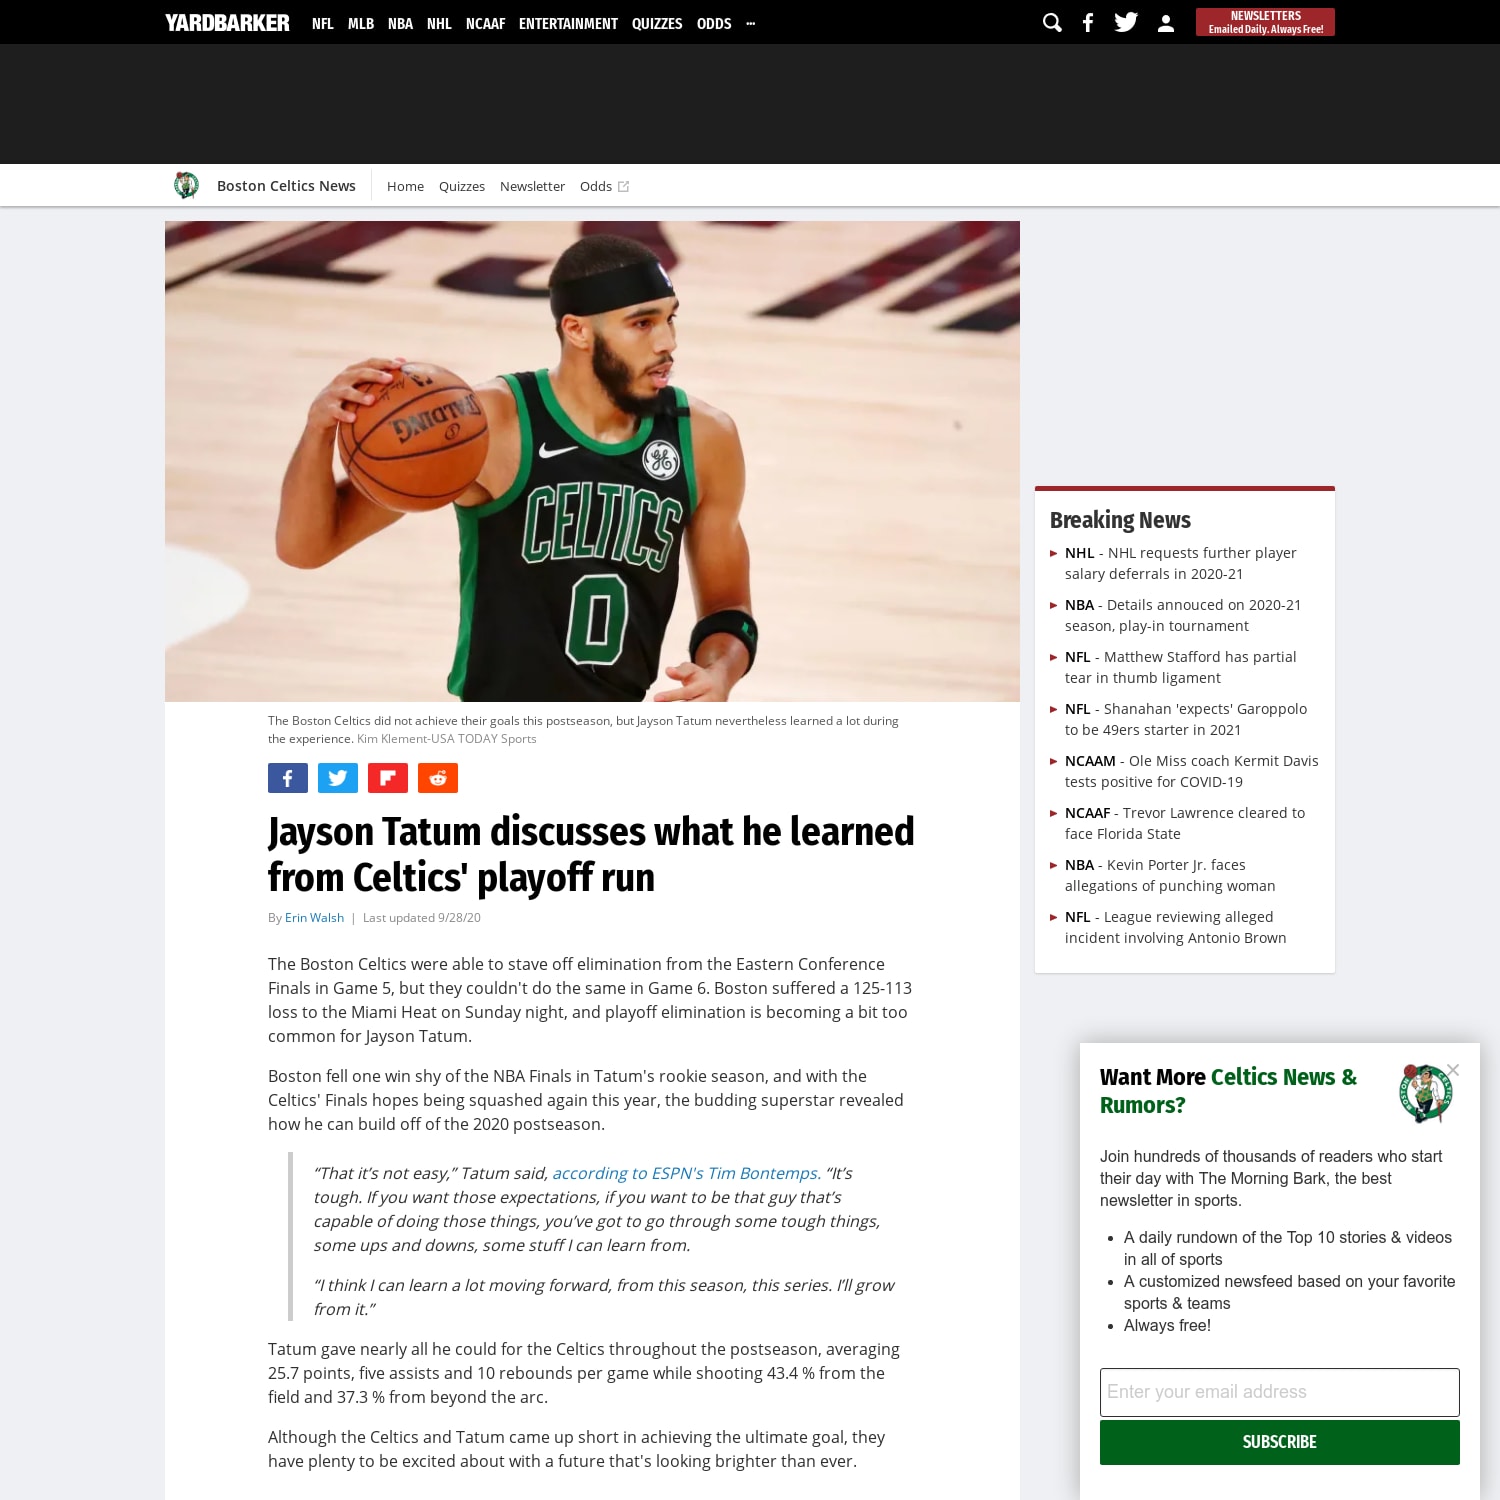 Jayson Tatum discusses what he learned from Celtics' playoff run